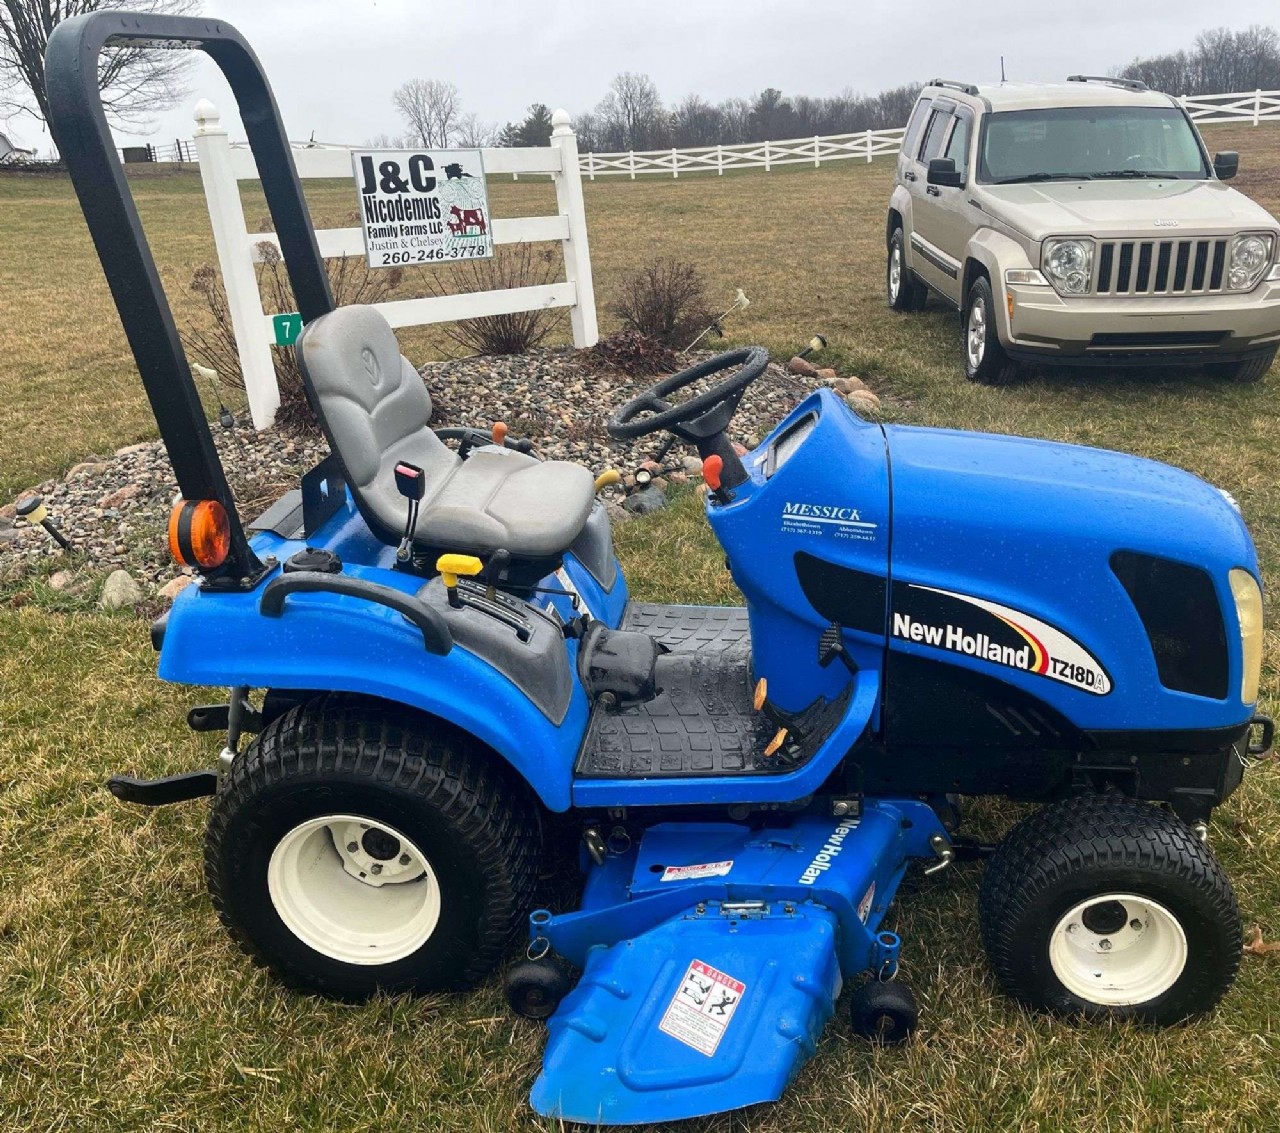 To fix a hydraulic issue on a New Holland TZ25 compact tractor